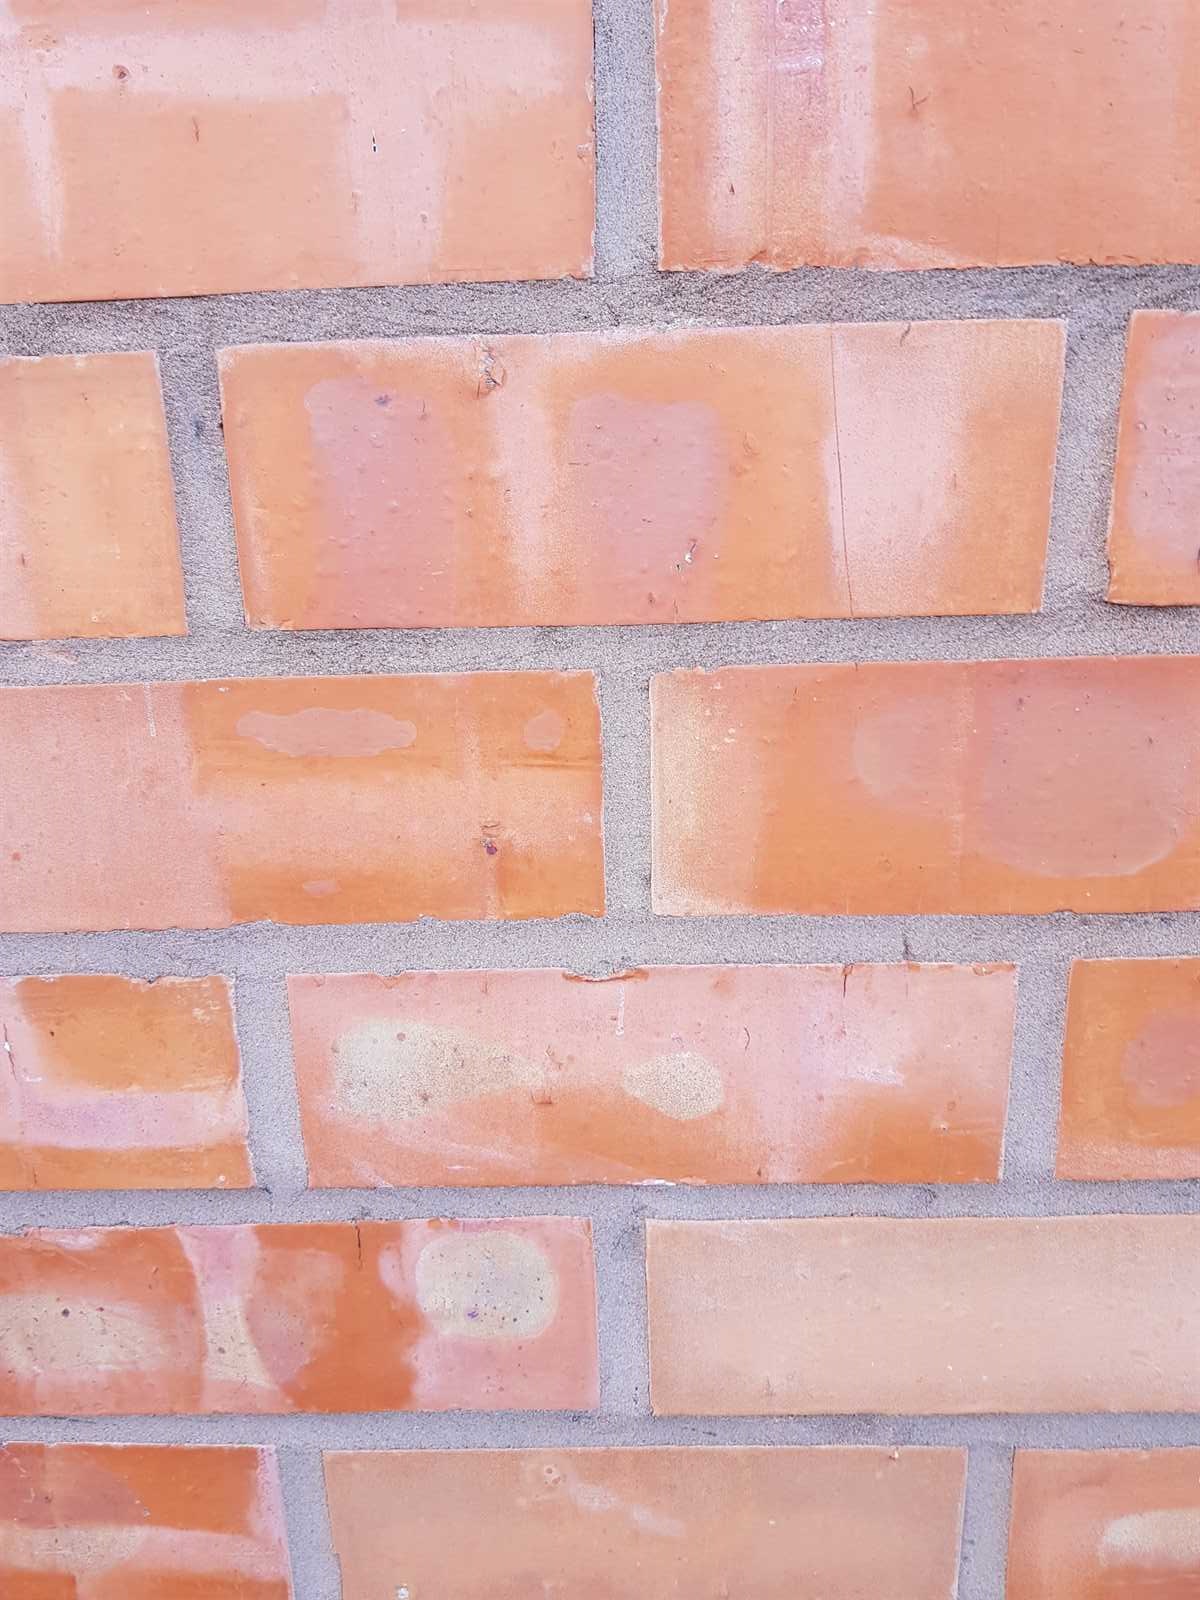 brickwork and pointing